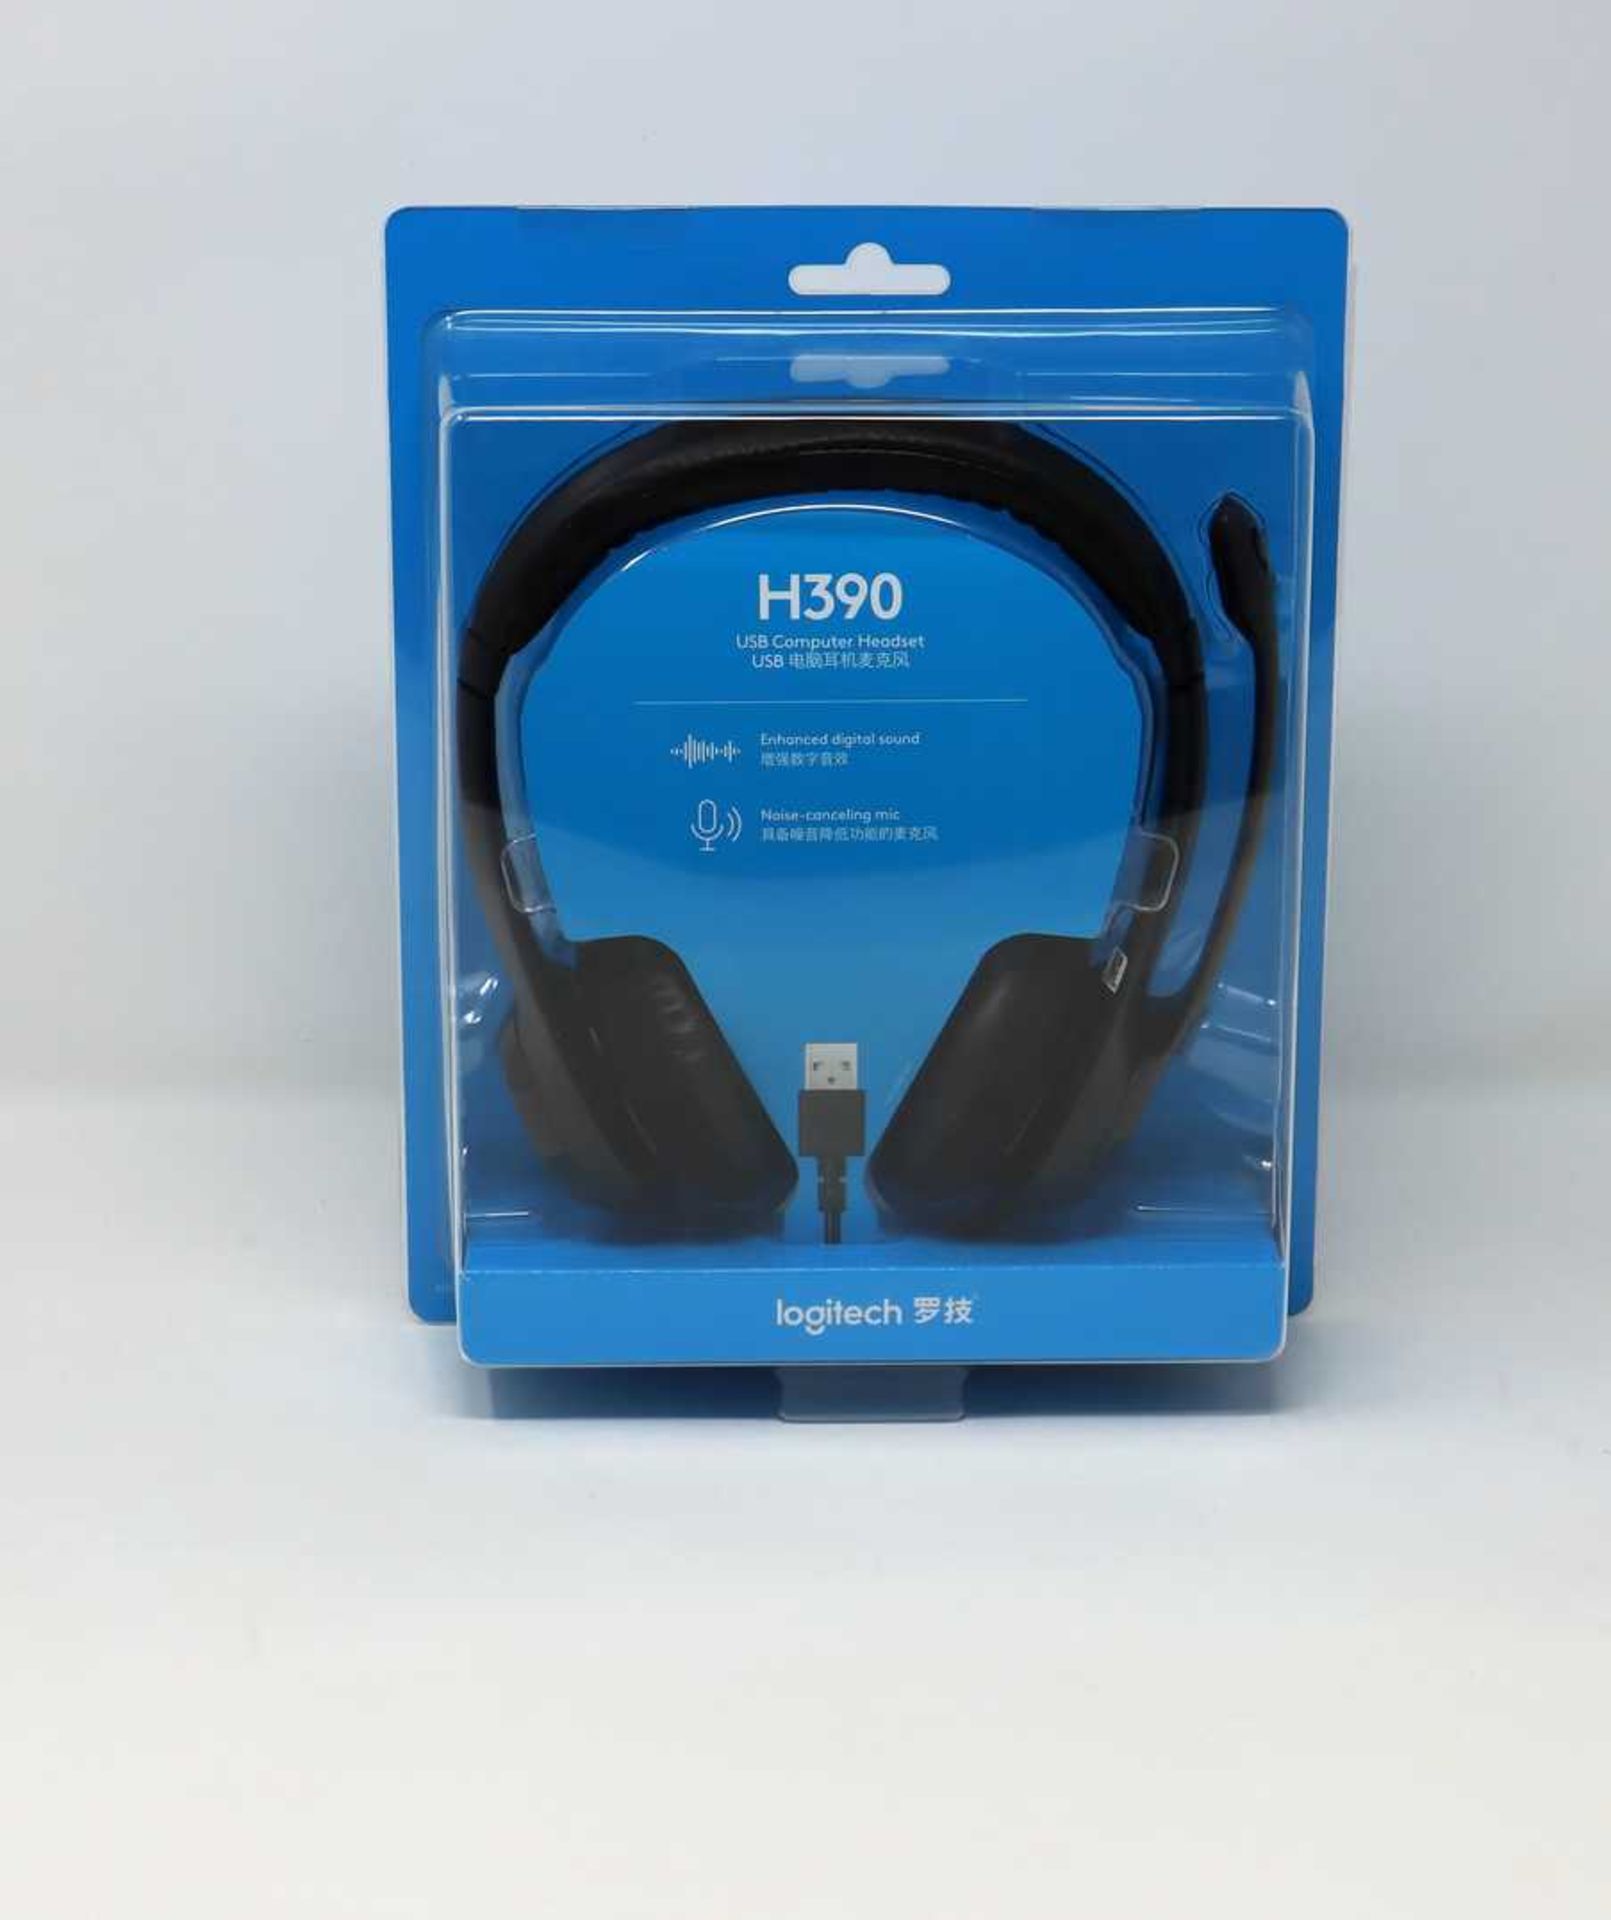 A boxed as new Logitech H390 USB Computer Headset (box sealed).